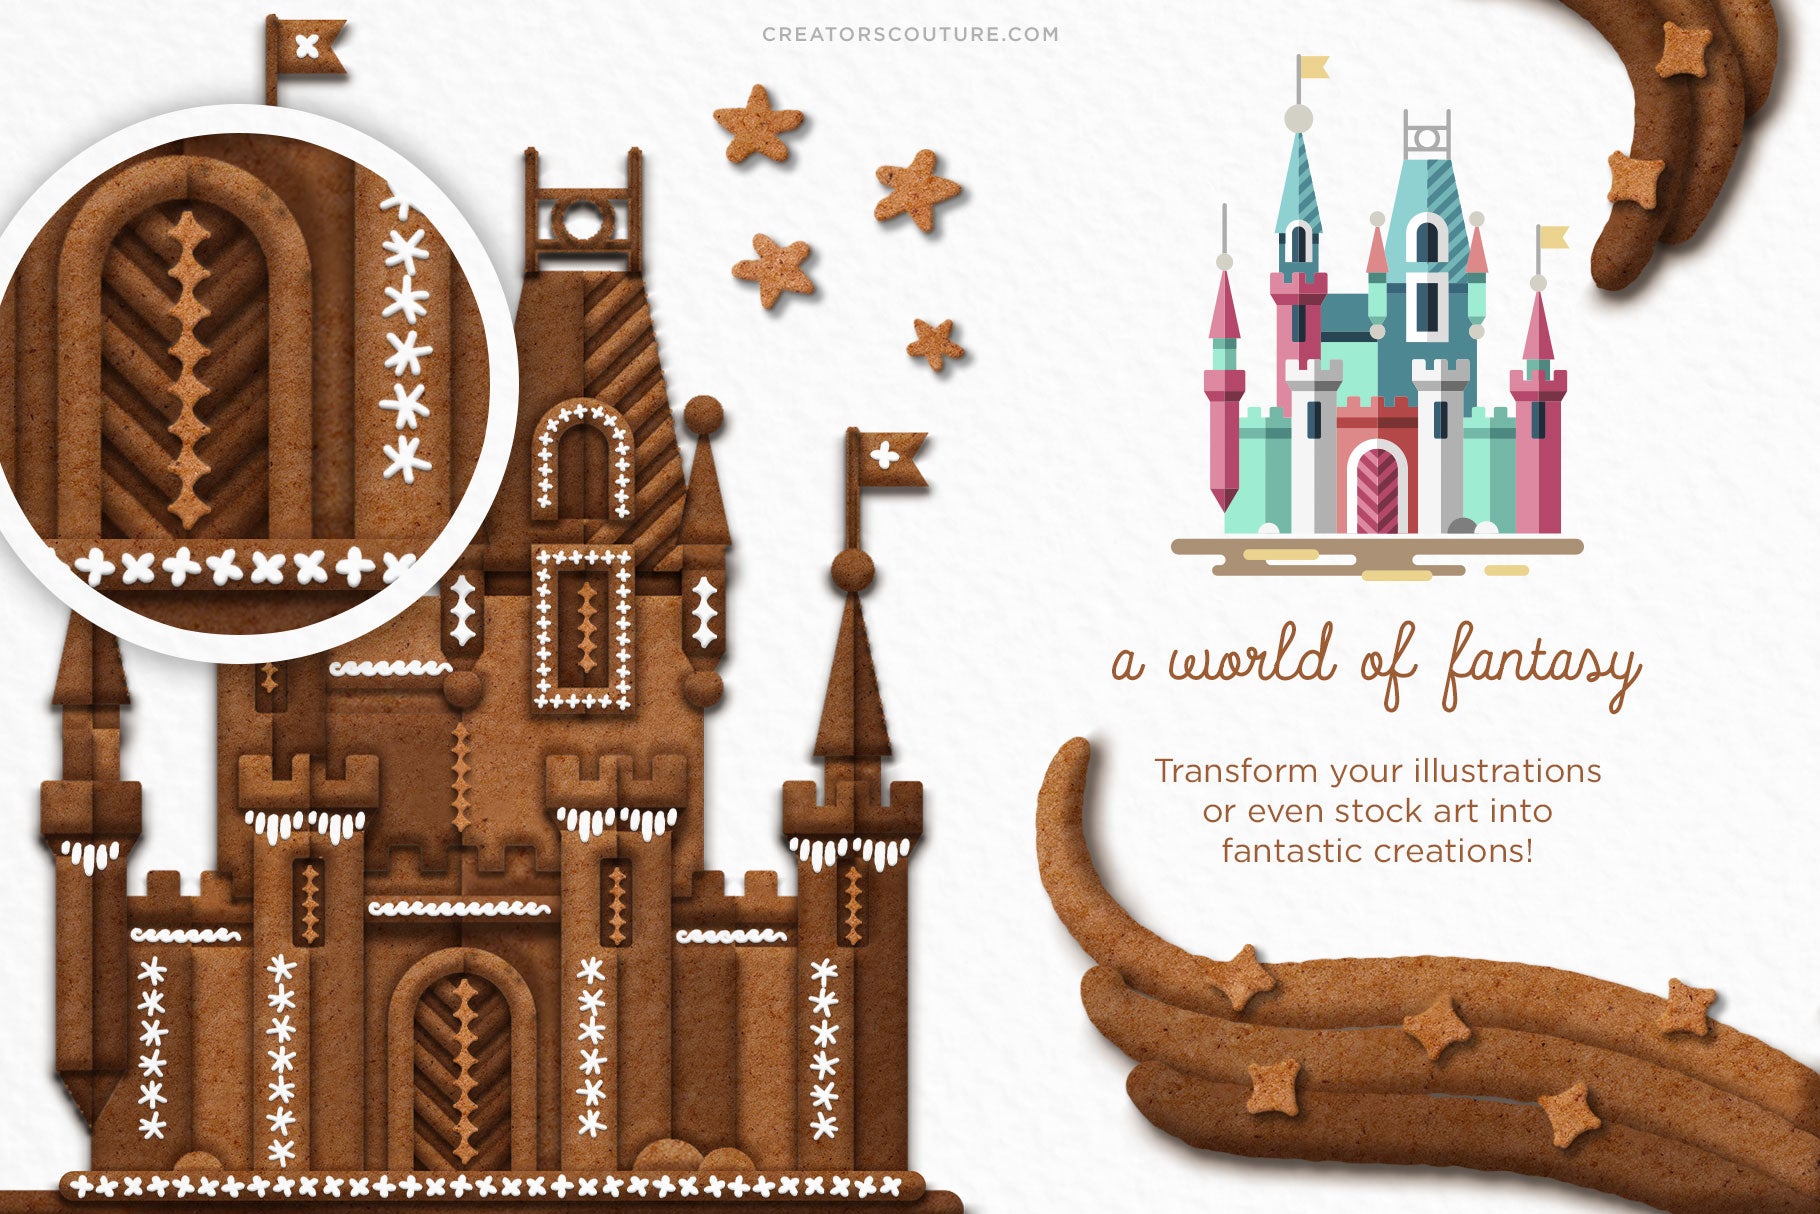 Gingerbread, Cookie, & Cake Graphic & Lettering Effects for Photoshop, cinderella castle in a cake style